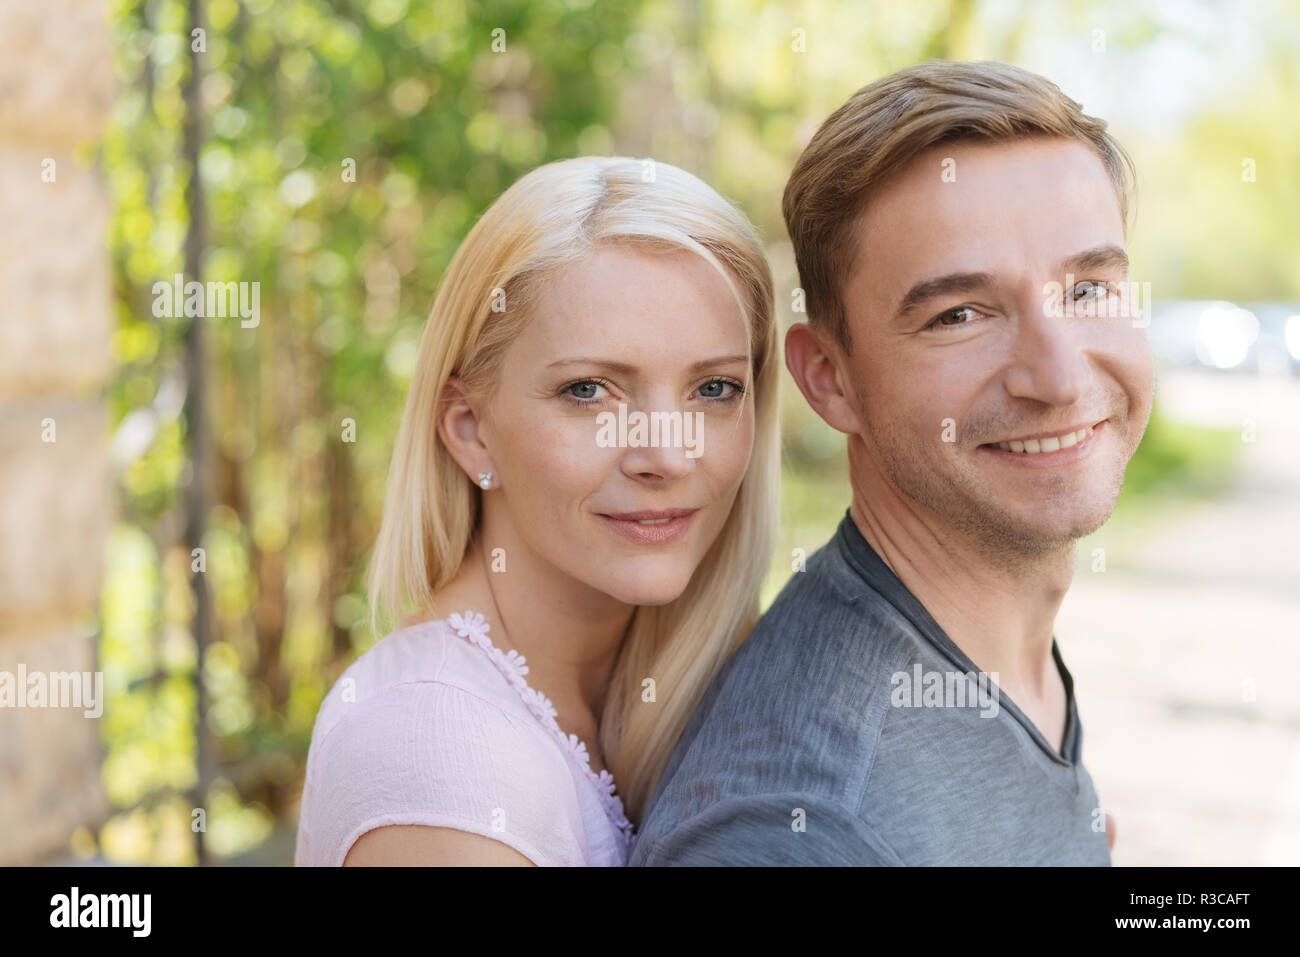 Attractive young couple standing close together turning to smile at the camera outdoors in a rural road Stock Photo